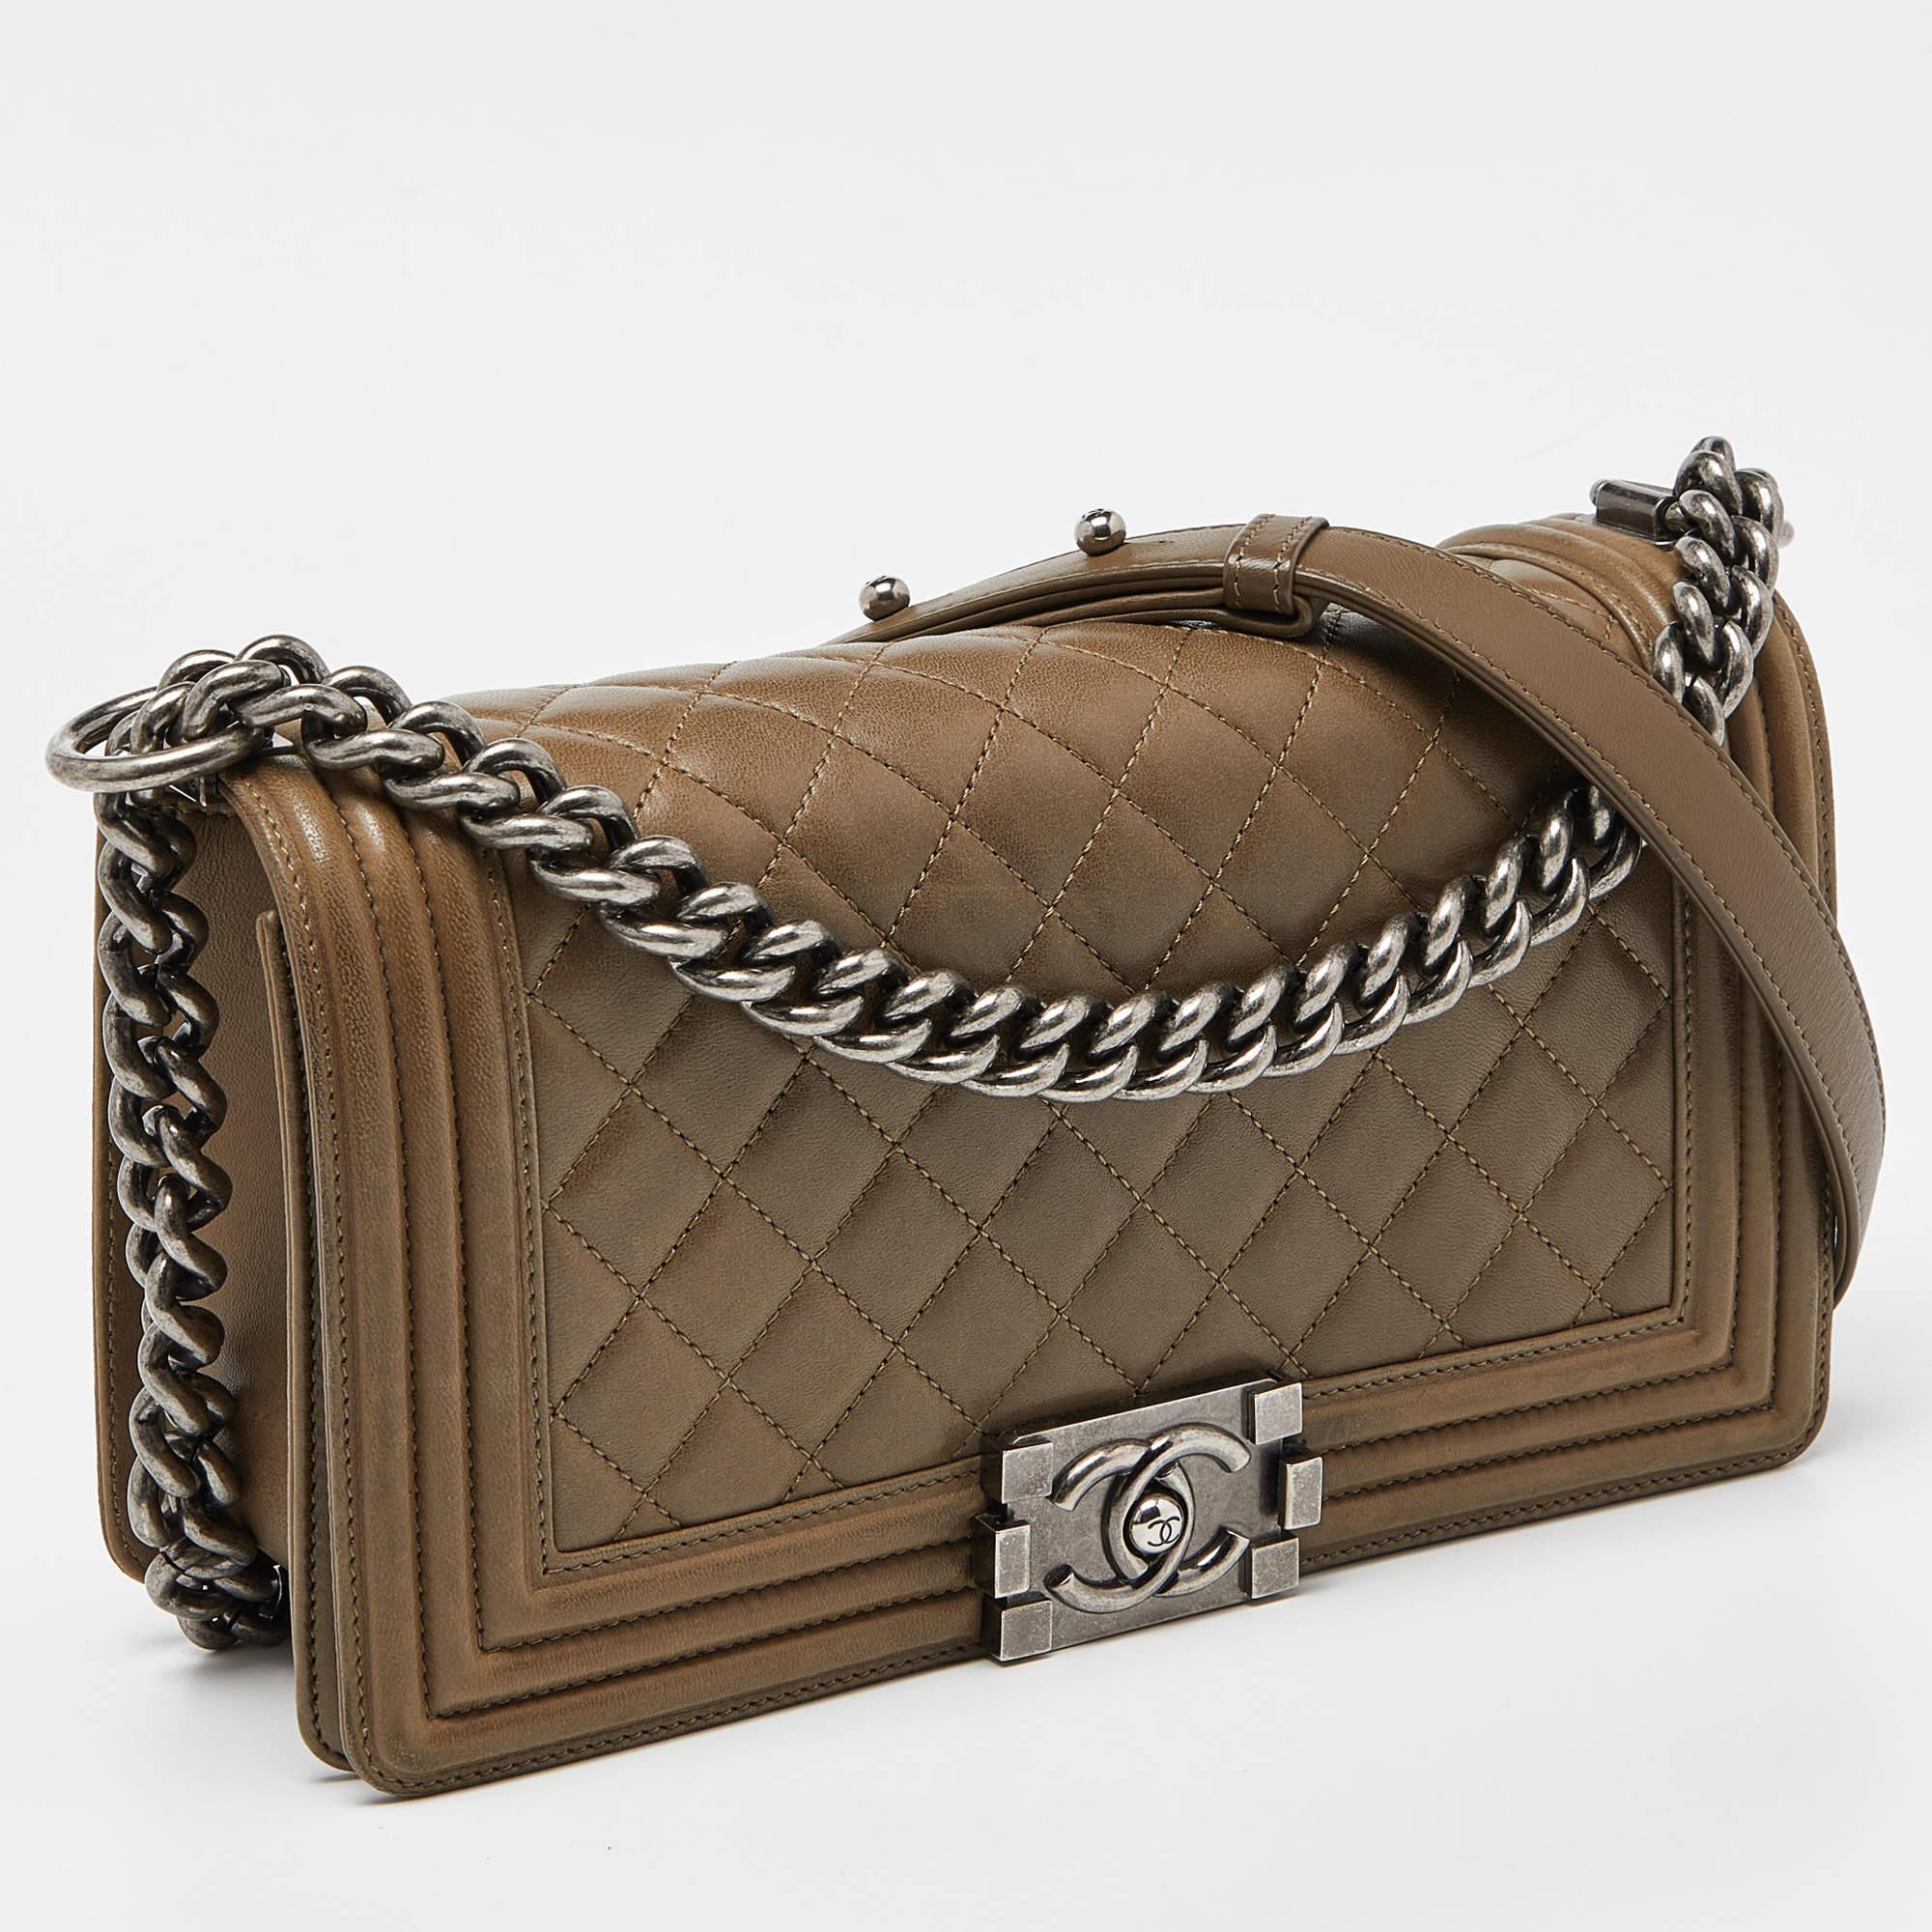 Marked by flawless craftsmanship and enduring appeal, this authentic Chanel Boy flap bag is bound to be a versatile and durable accessory. It has a compact size.

